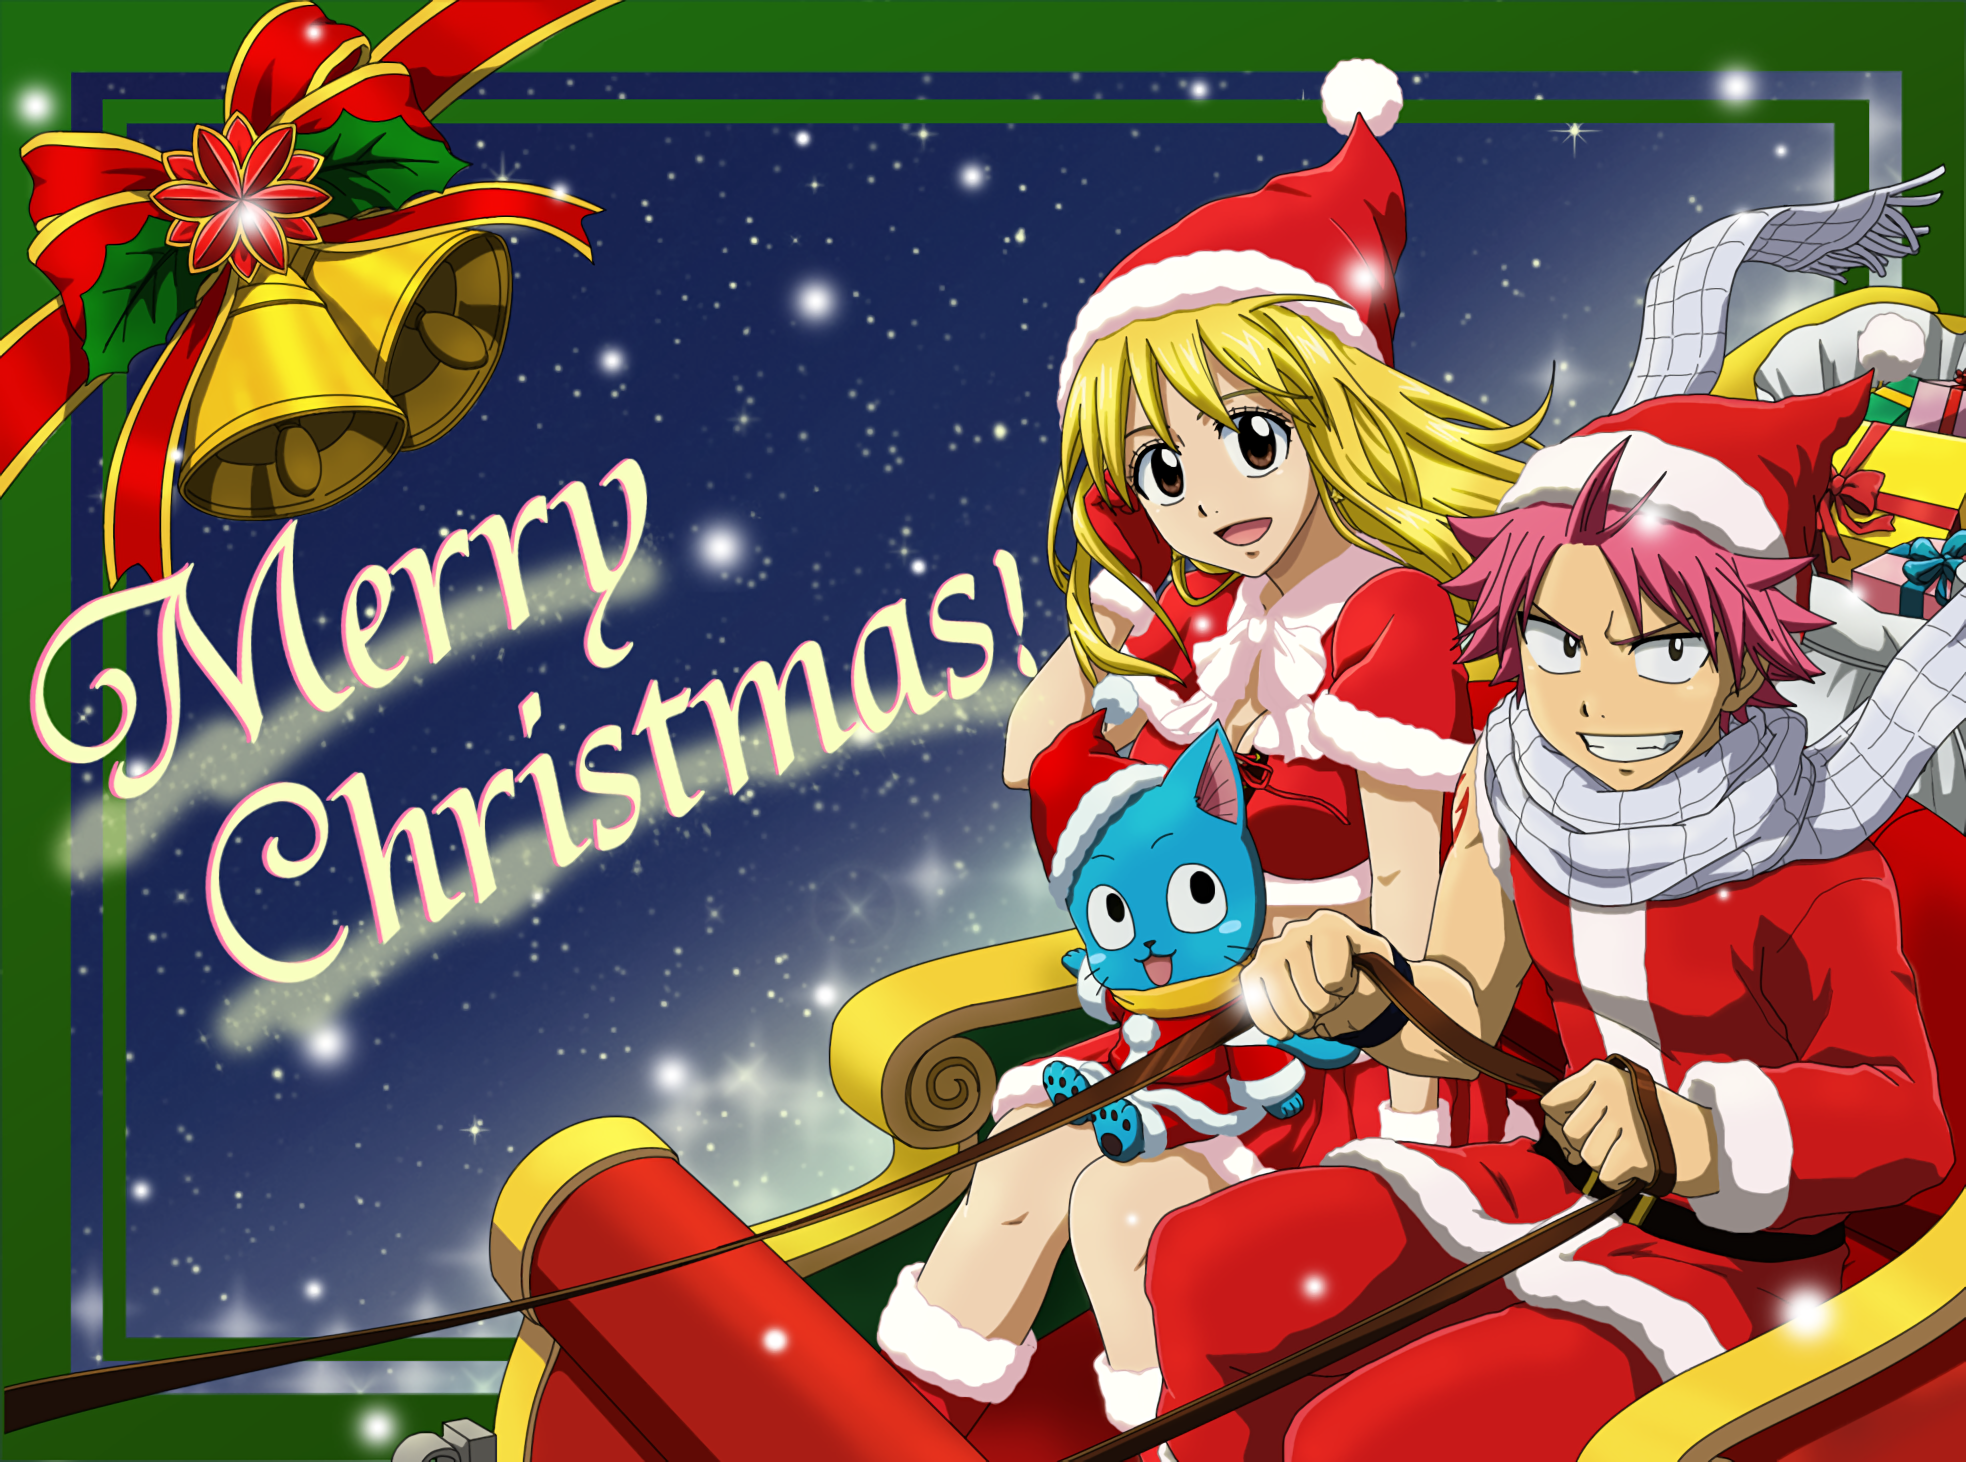 Fairy Tail HD Wallpaper Background Image